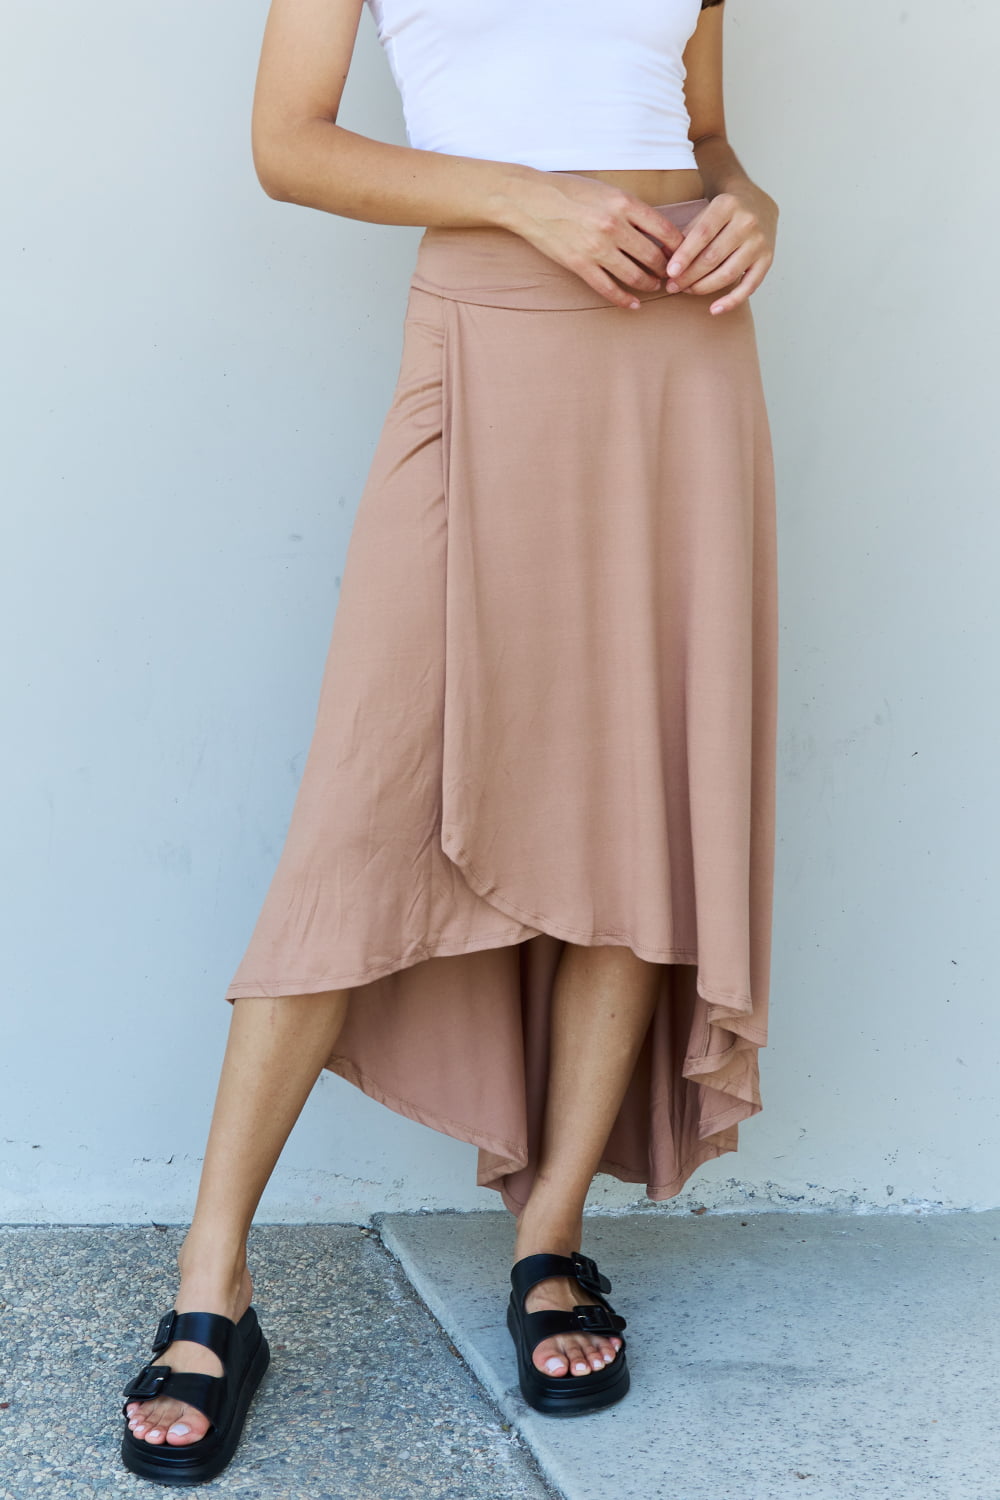 Ninexis First Choice High Waisted Flare Maxi Skirt in Camel Camel